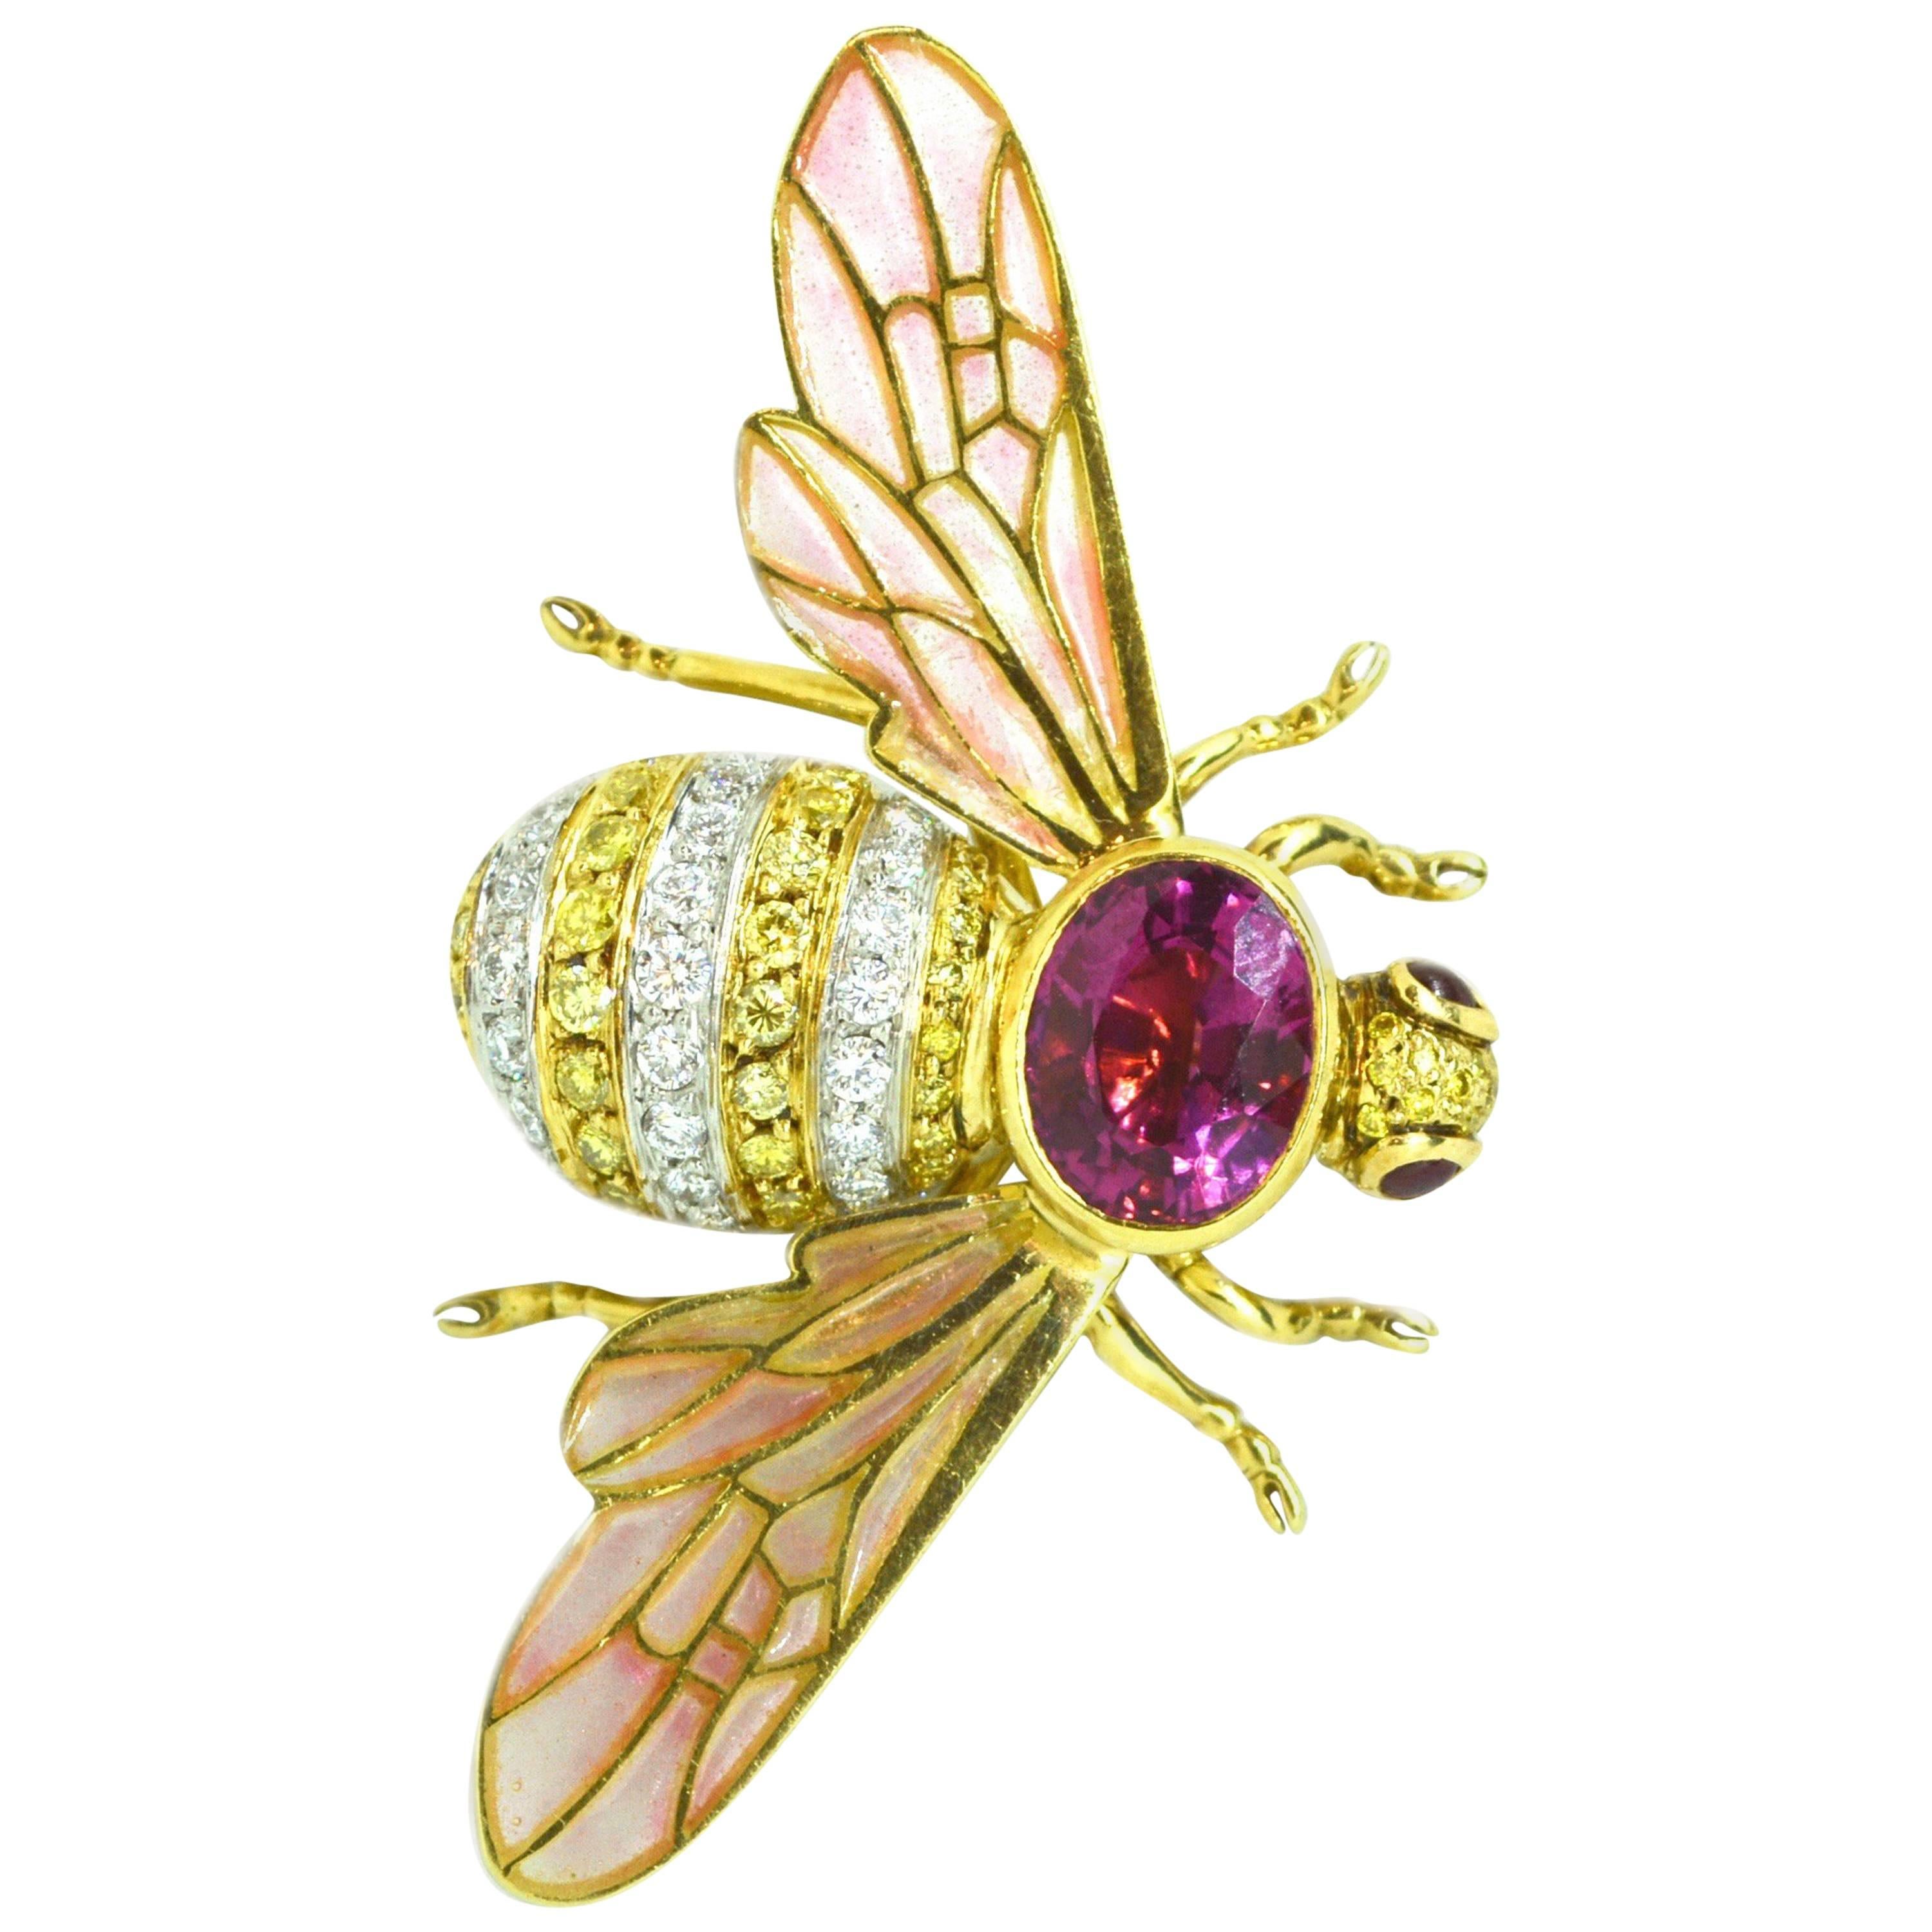 Adria de Haume 18 Karat Gold Bee Brooch / One of a Kind For Sale